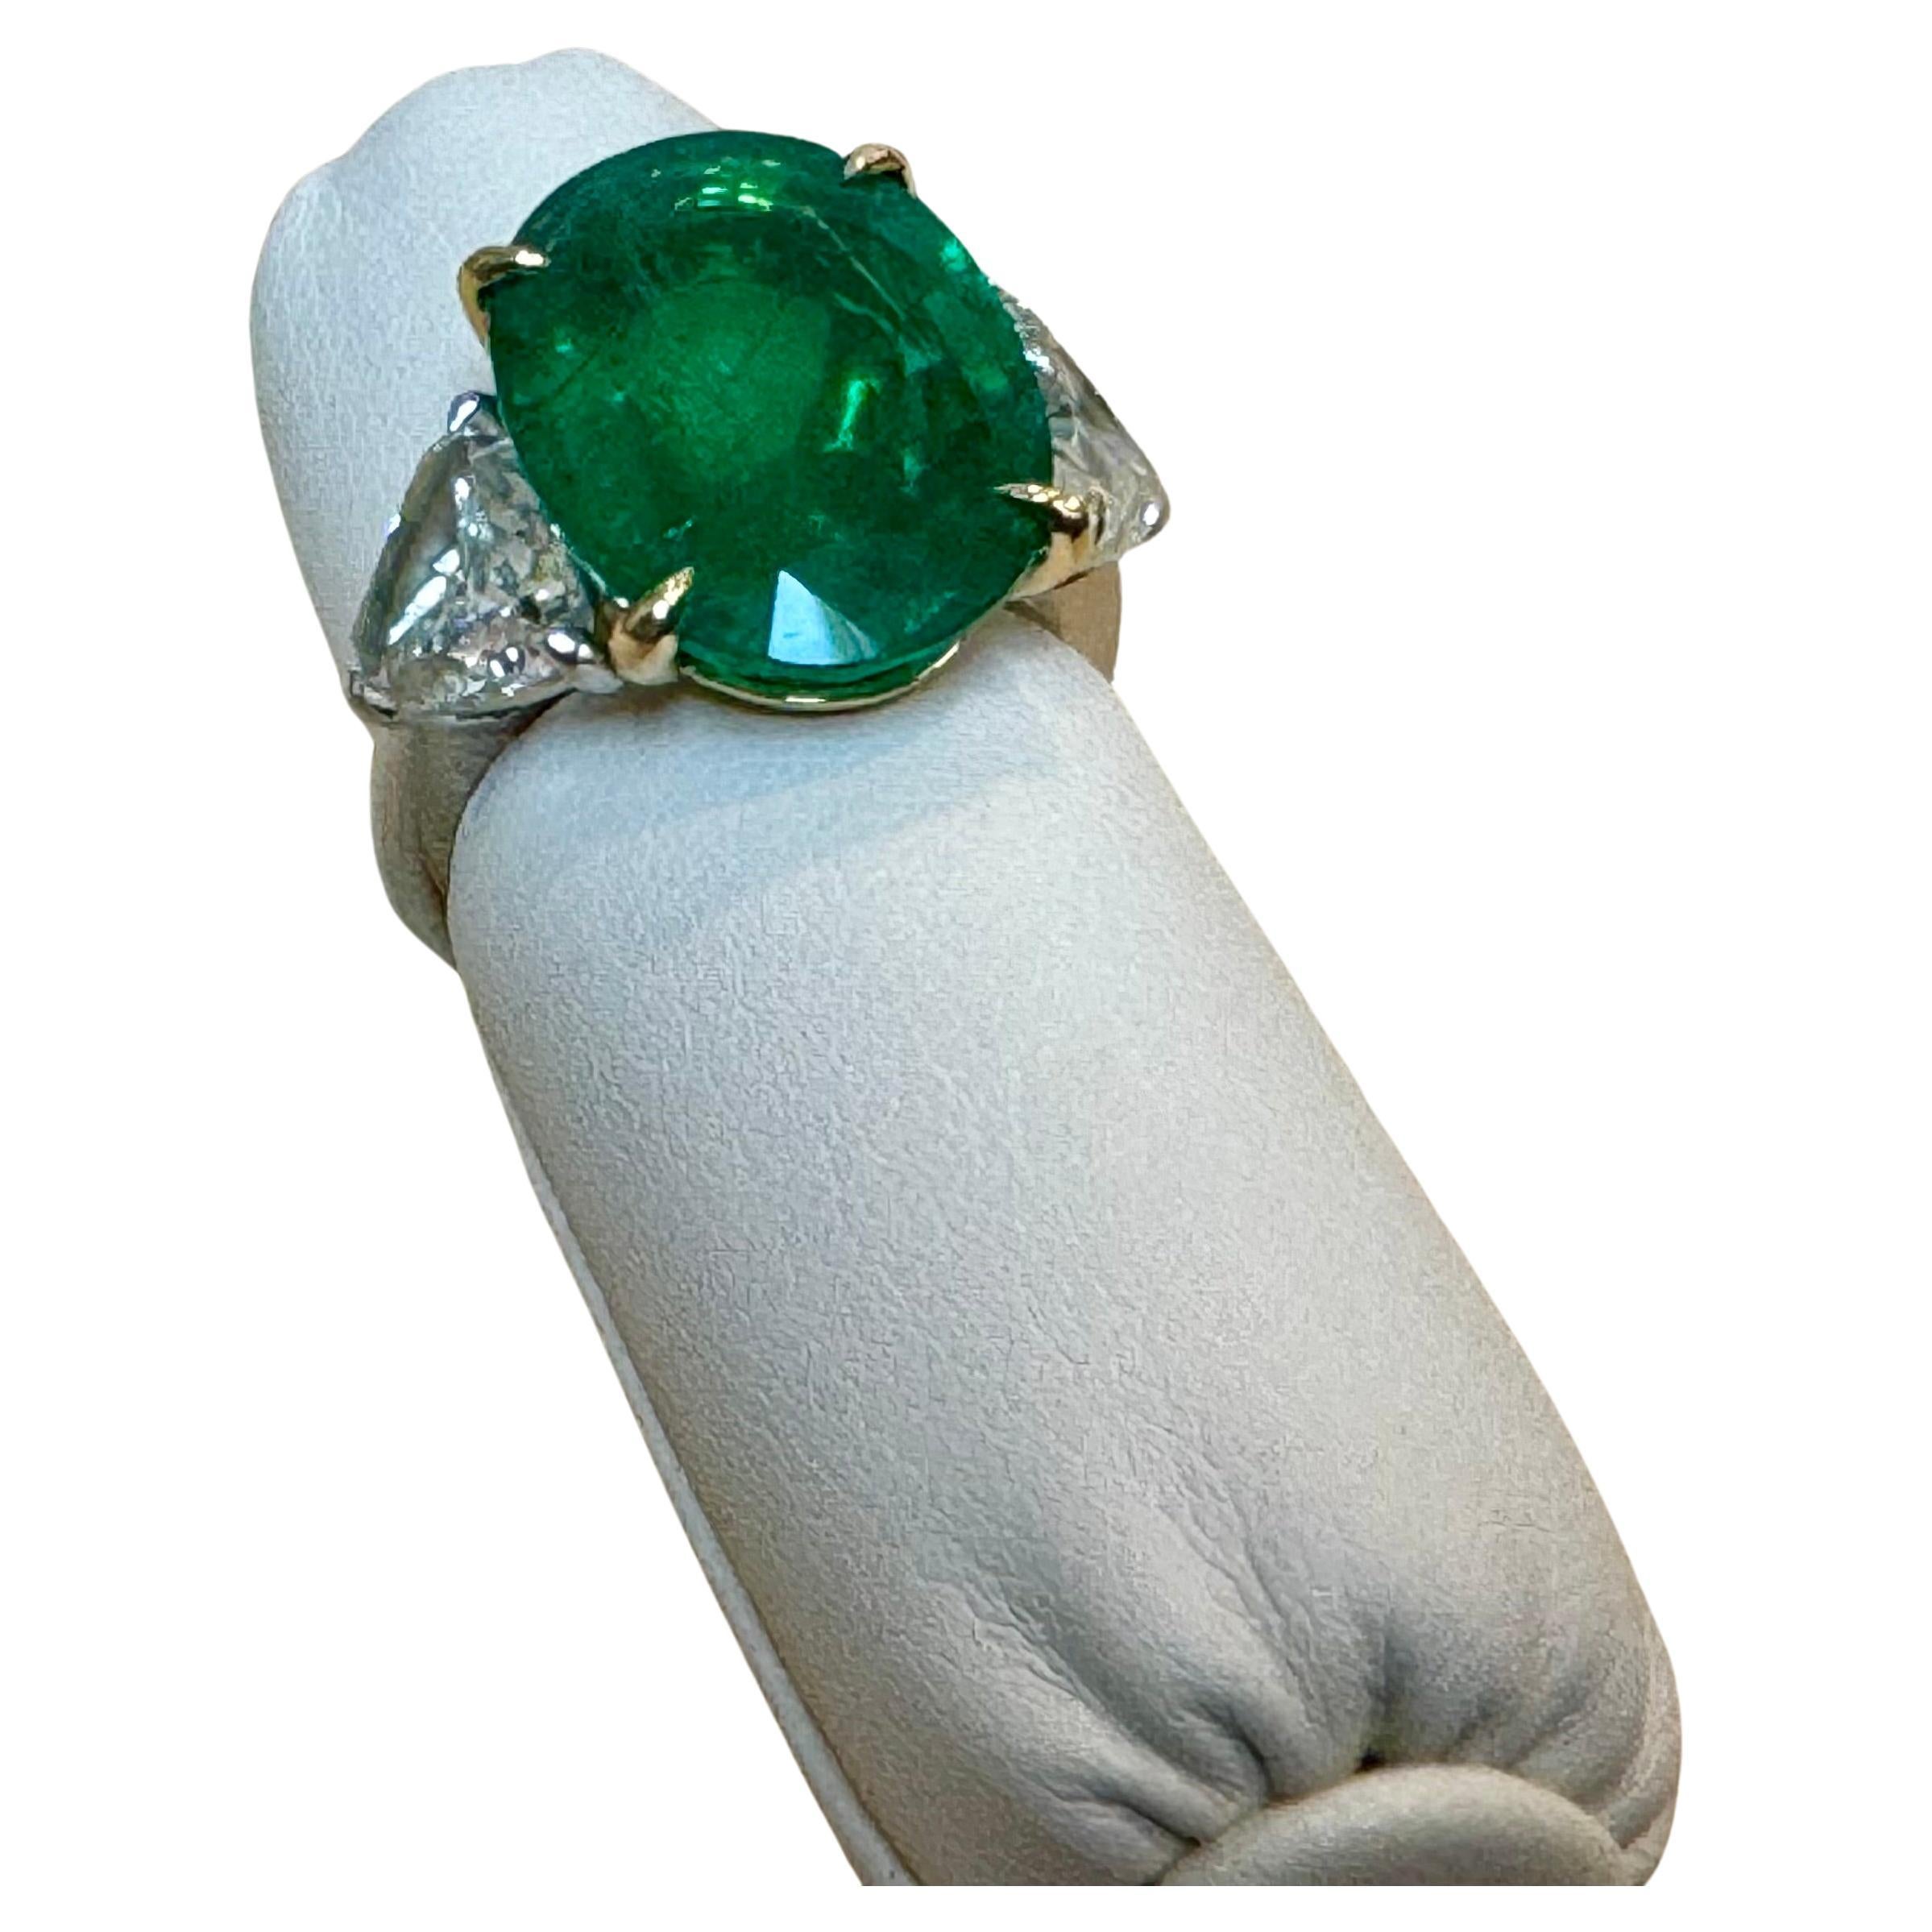 
A classic, cocktail  / Engagement ring 
GIA Certified 11 Ct Fine Oval Zambian Emerald & GIA Certified  1.52 Ct Each Trillion Diamond Ring in Ptatinum and 14 Karat Yellow Gold
Three GIA certificate for three stones in the ring
GIA Report #